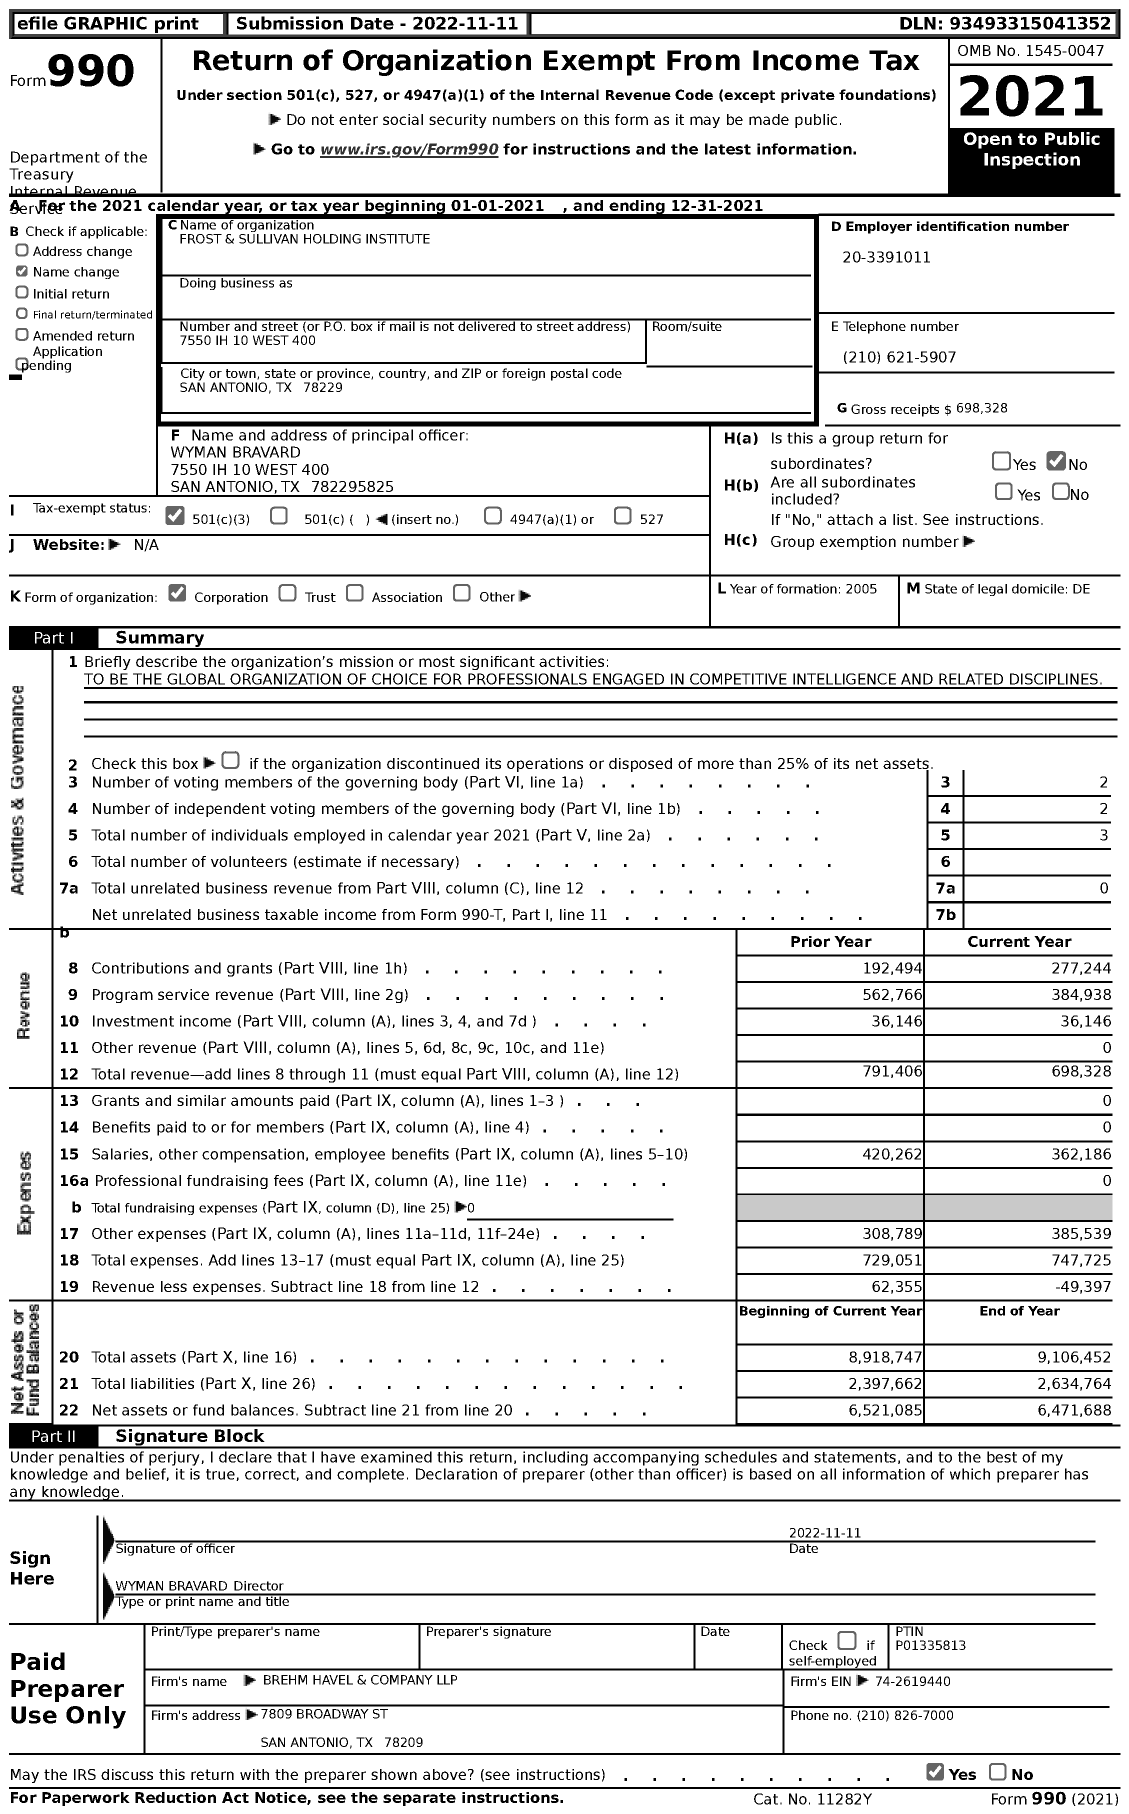 Image of first page of 2021 Form 990 for Frost and Sullivan Holding Institute